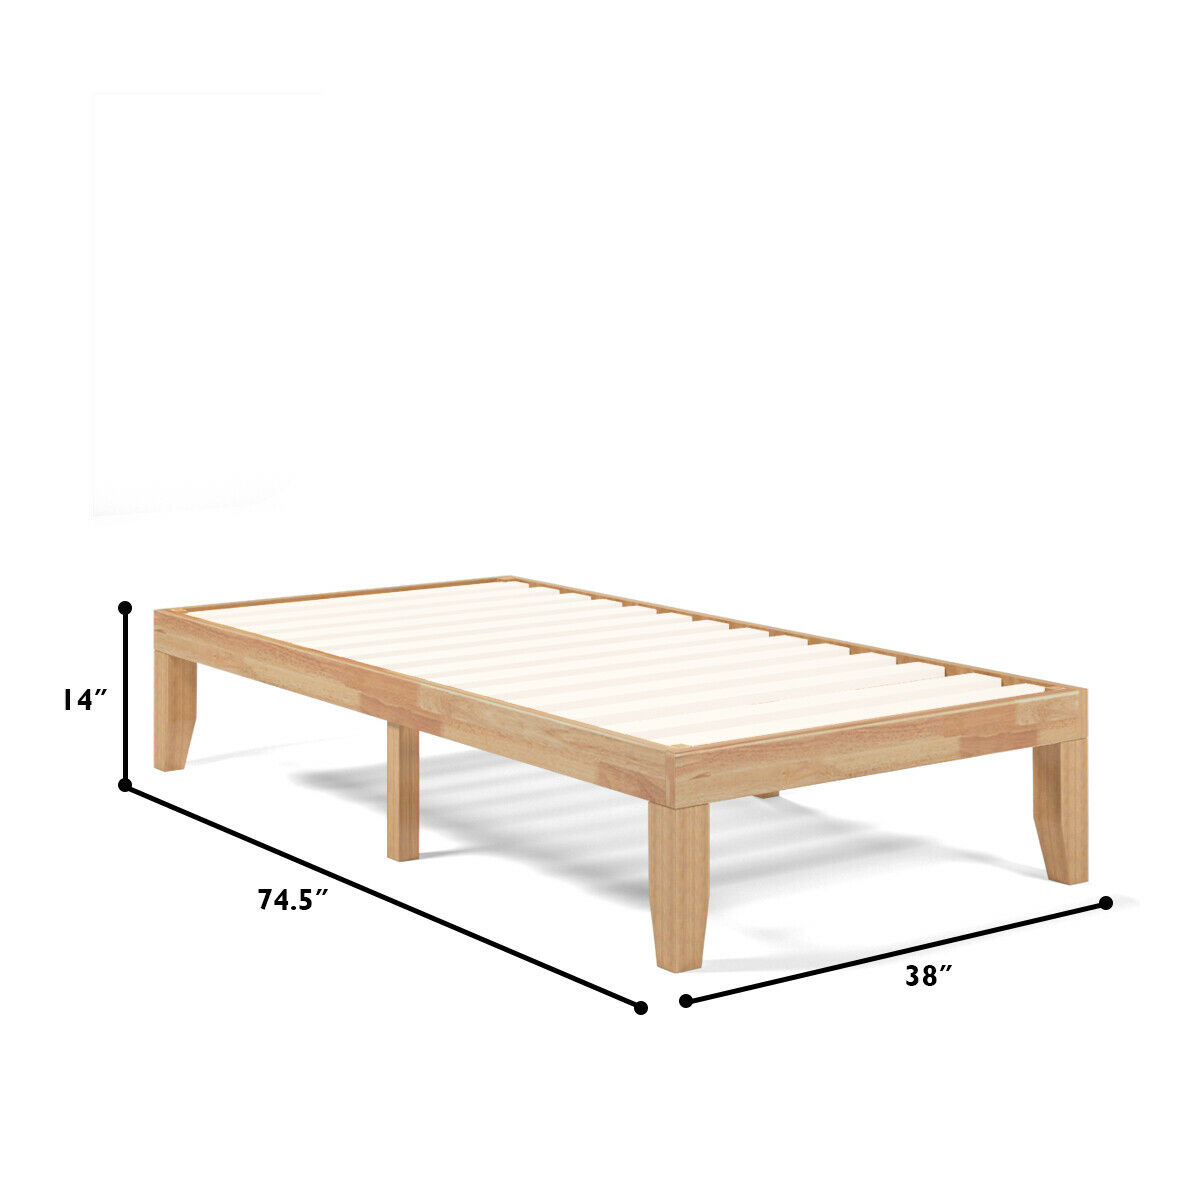 Costway Twin Size 14 Wooden Bed Frame, Twin Size Wooden Bed Frame